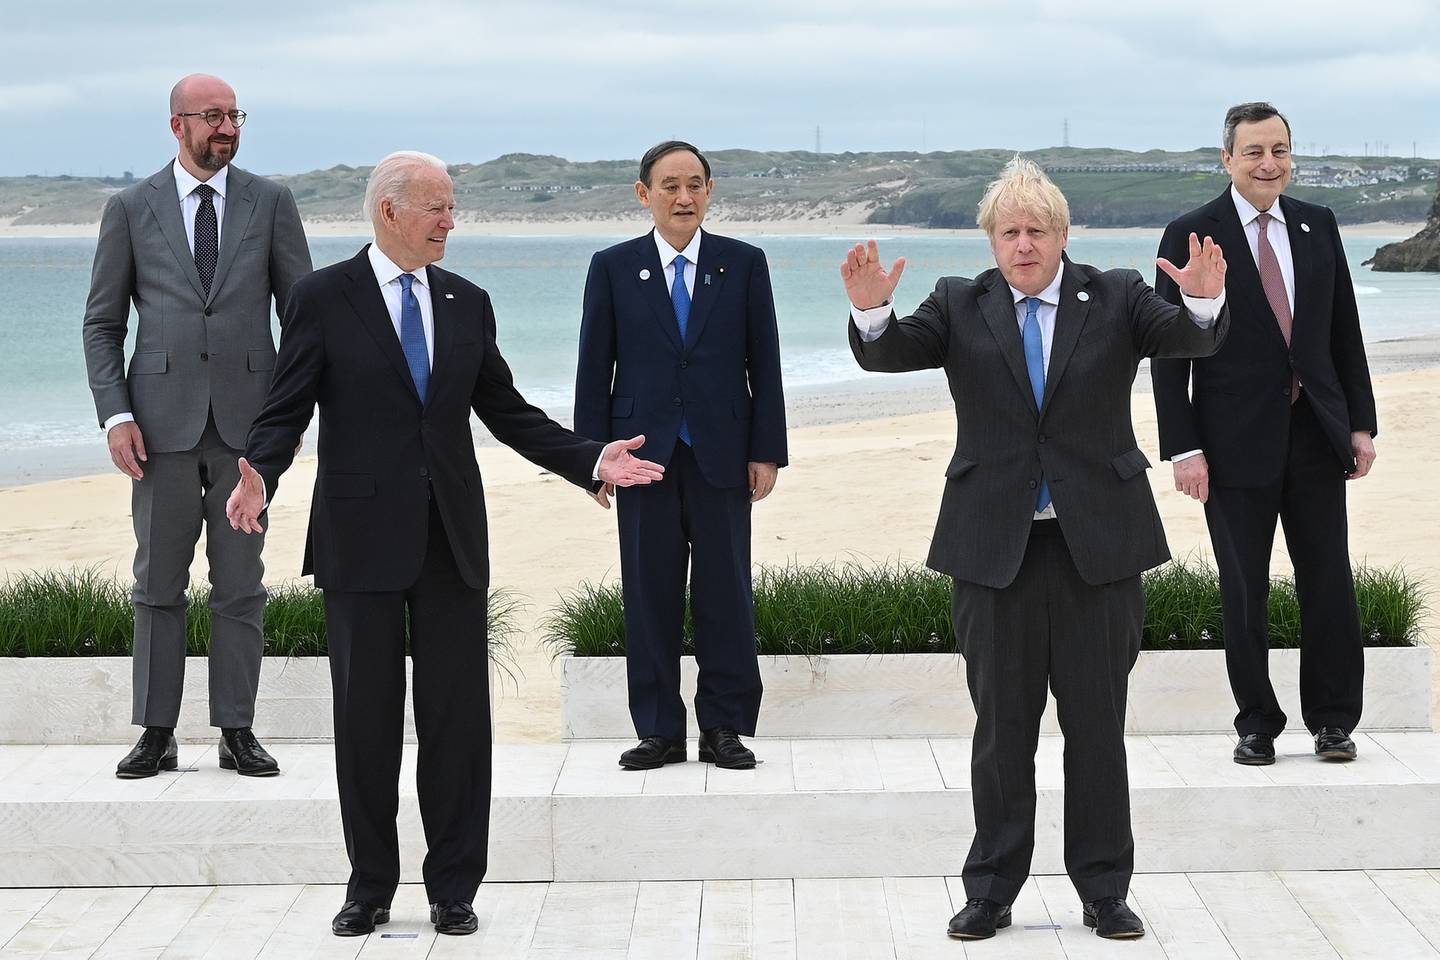 Boris Johnson hosts leaders at the G7 Summit in Carbis Bay, Cornwall, in 2021. Getty Images